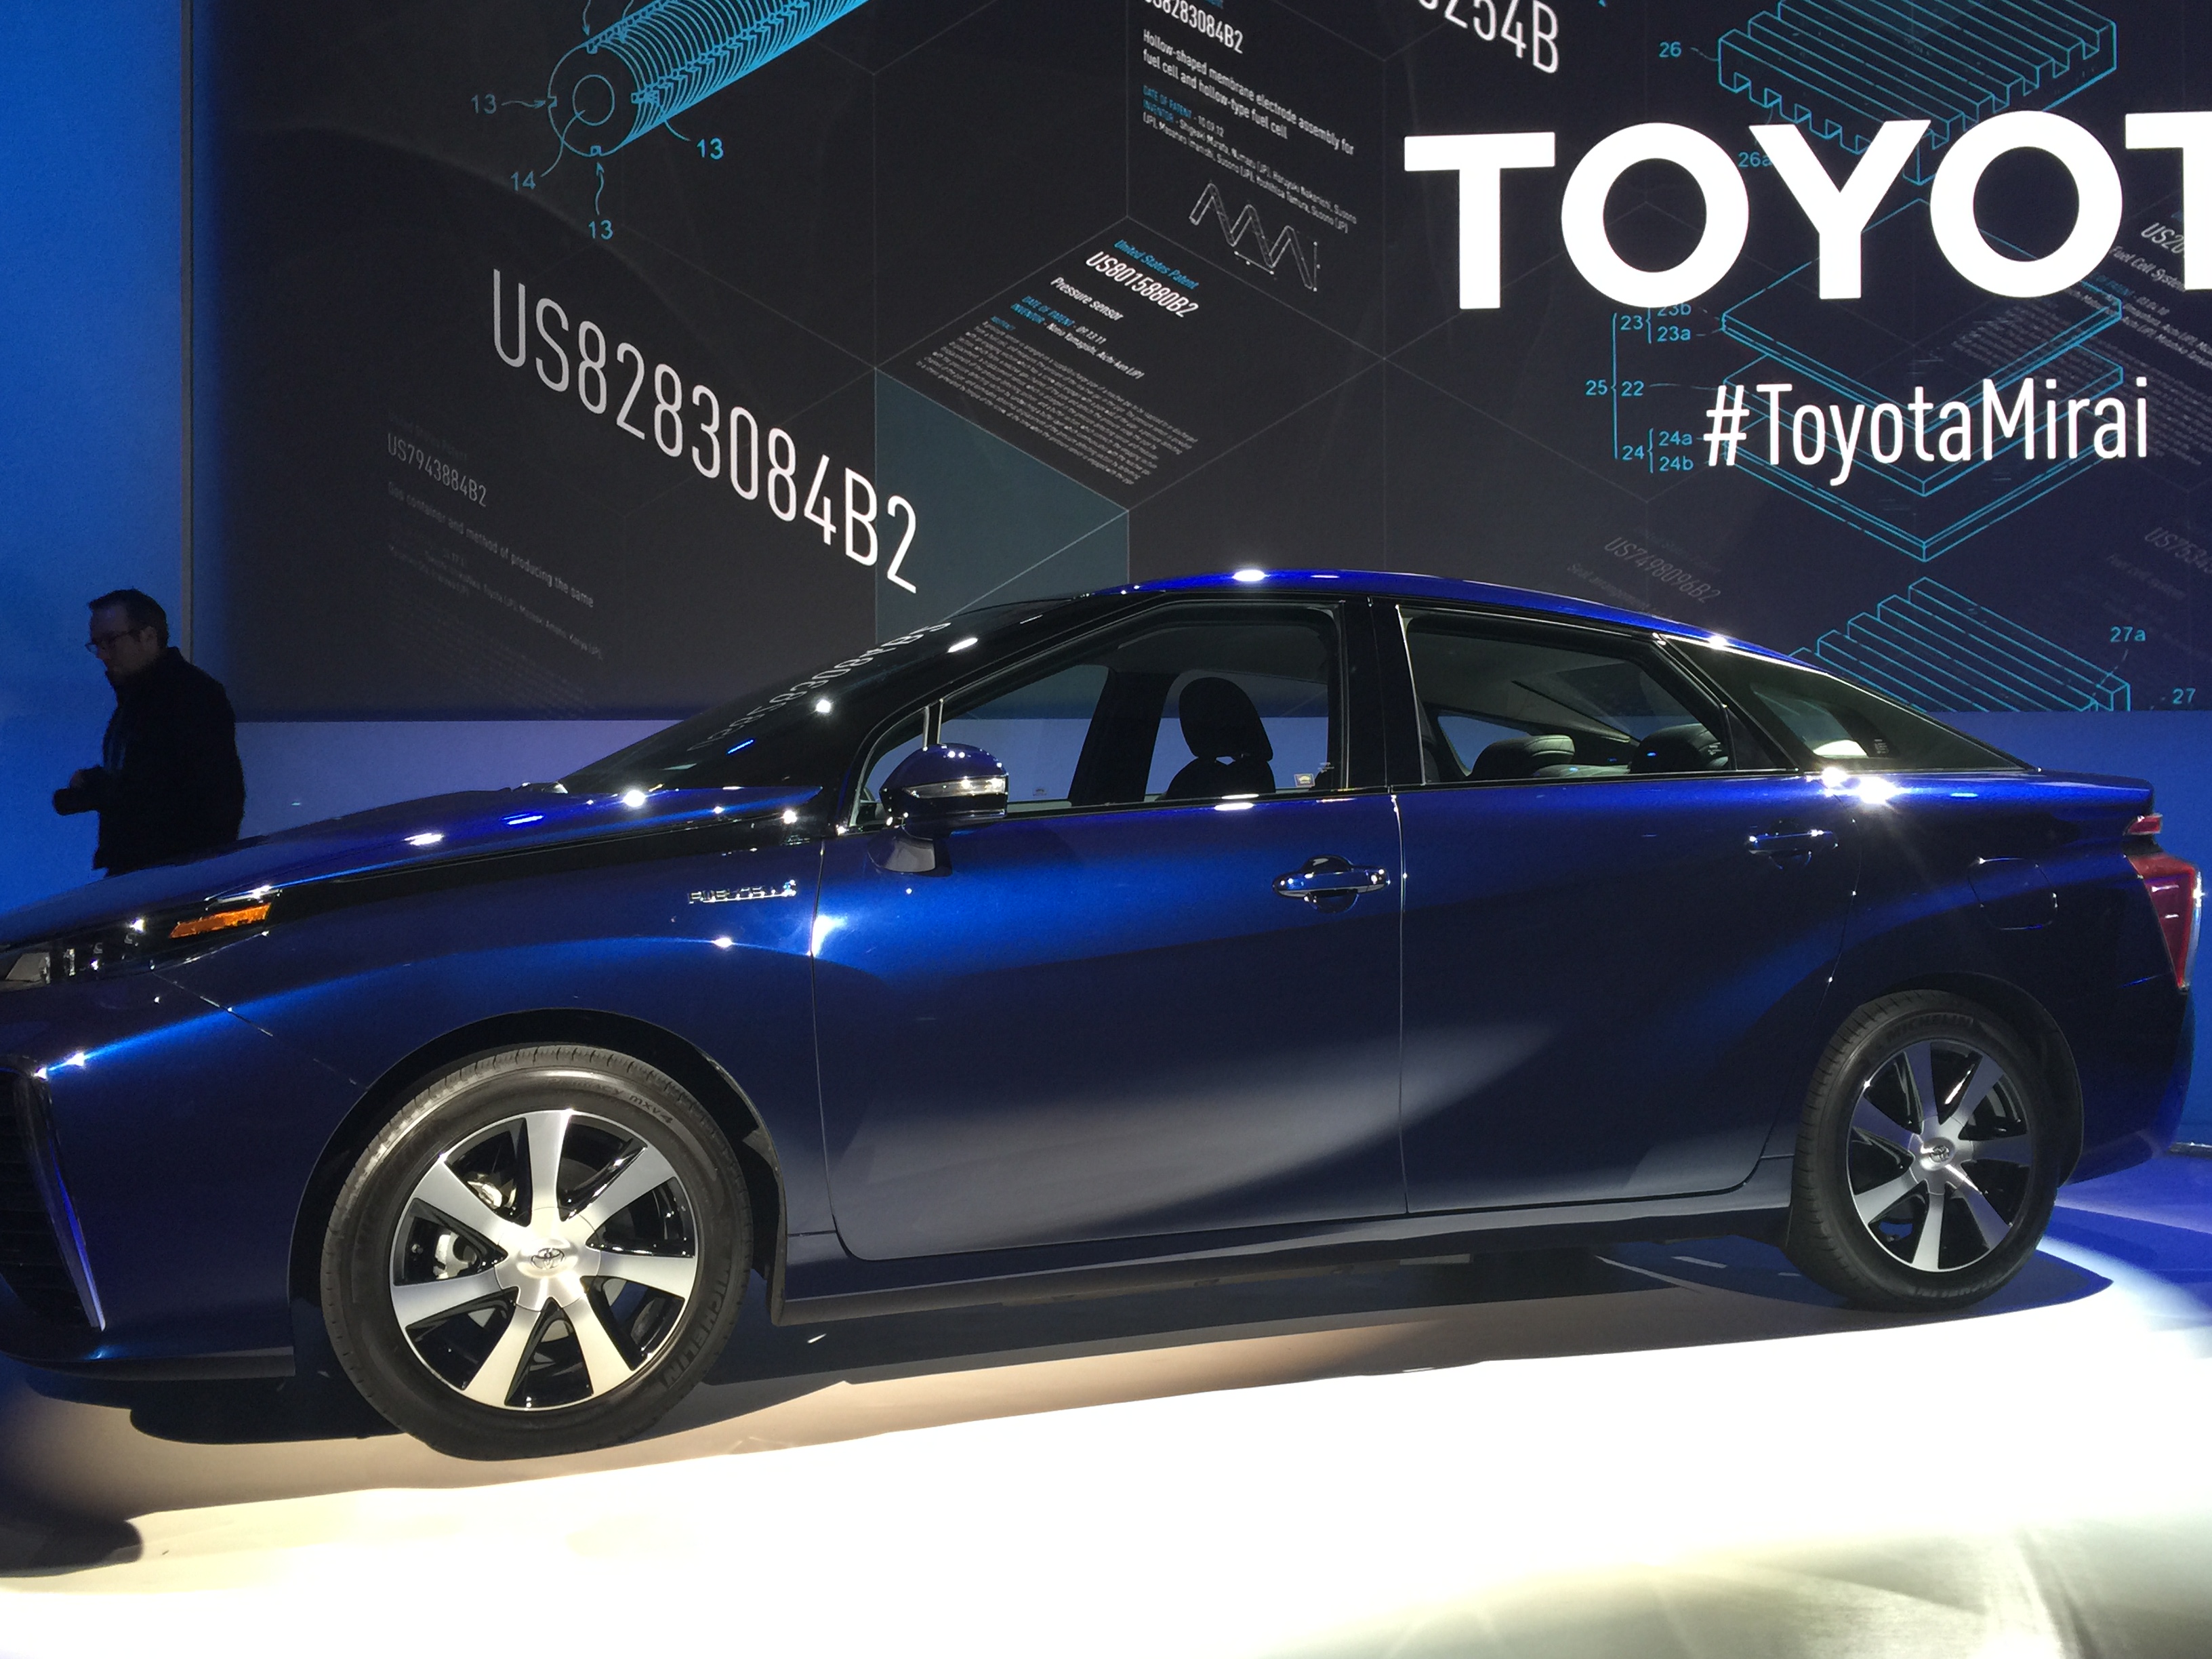 Toyota Plans Commercial Release Of Hydrogen Fueled Mirai This Fall